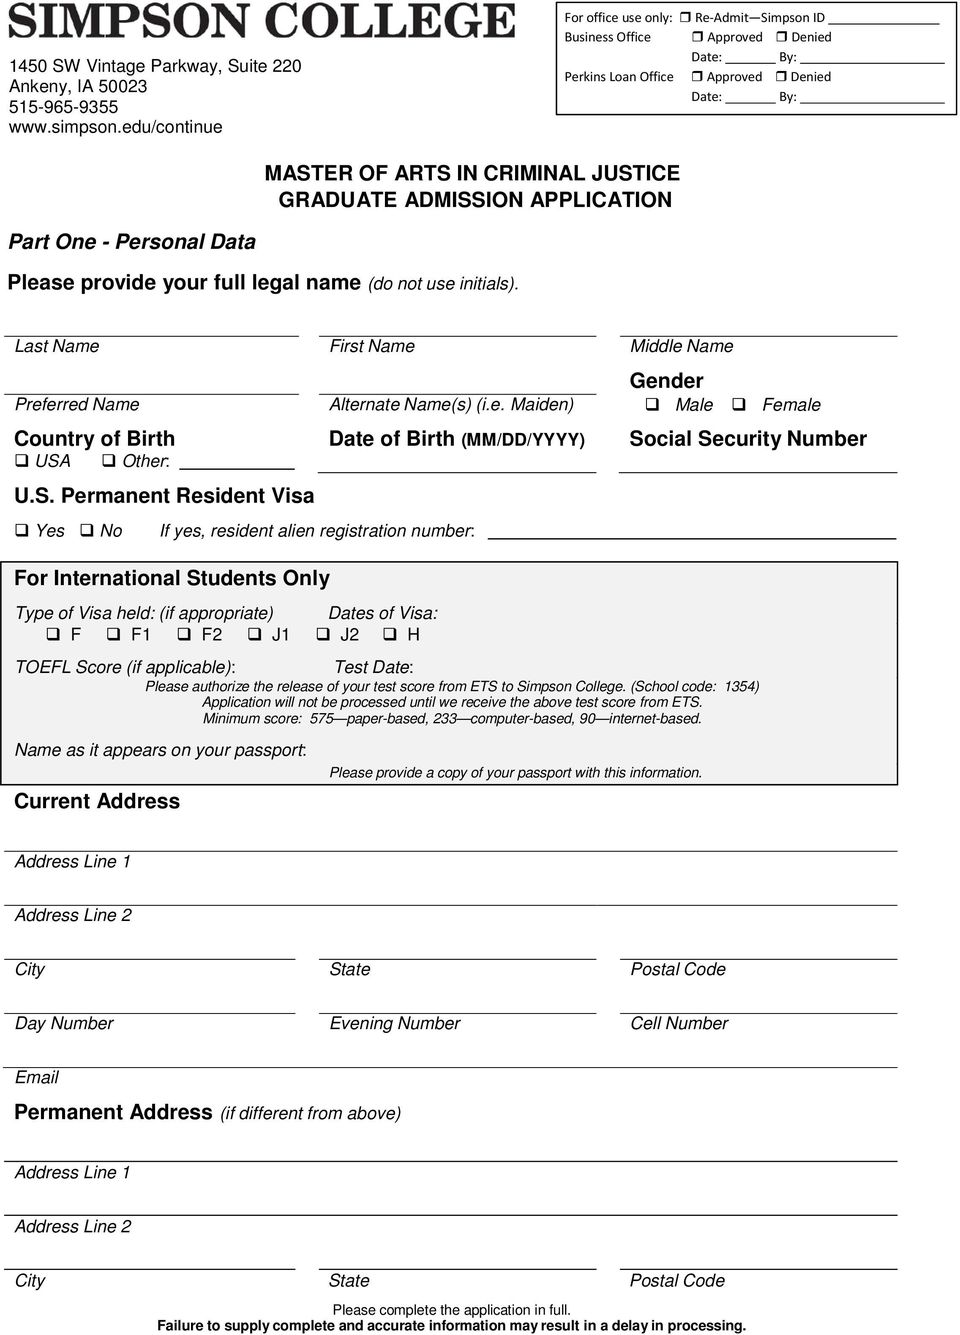 APPLICATION Part One - Personal Data Please provide your full legal name (do not use initials). Last Name First Name Middle Name Gender Preferred Name Alternate Name(s) (i.e. Maiden) Male Female Country of Birth USA Other: U.